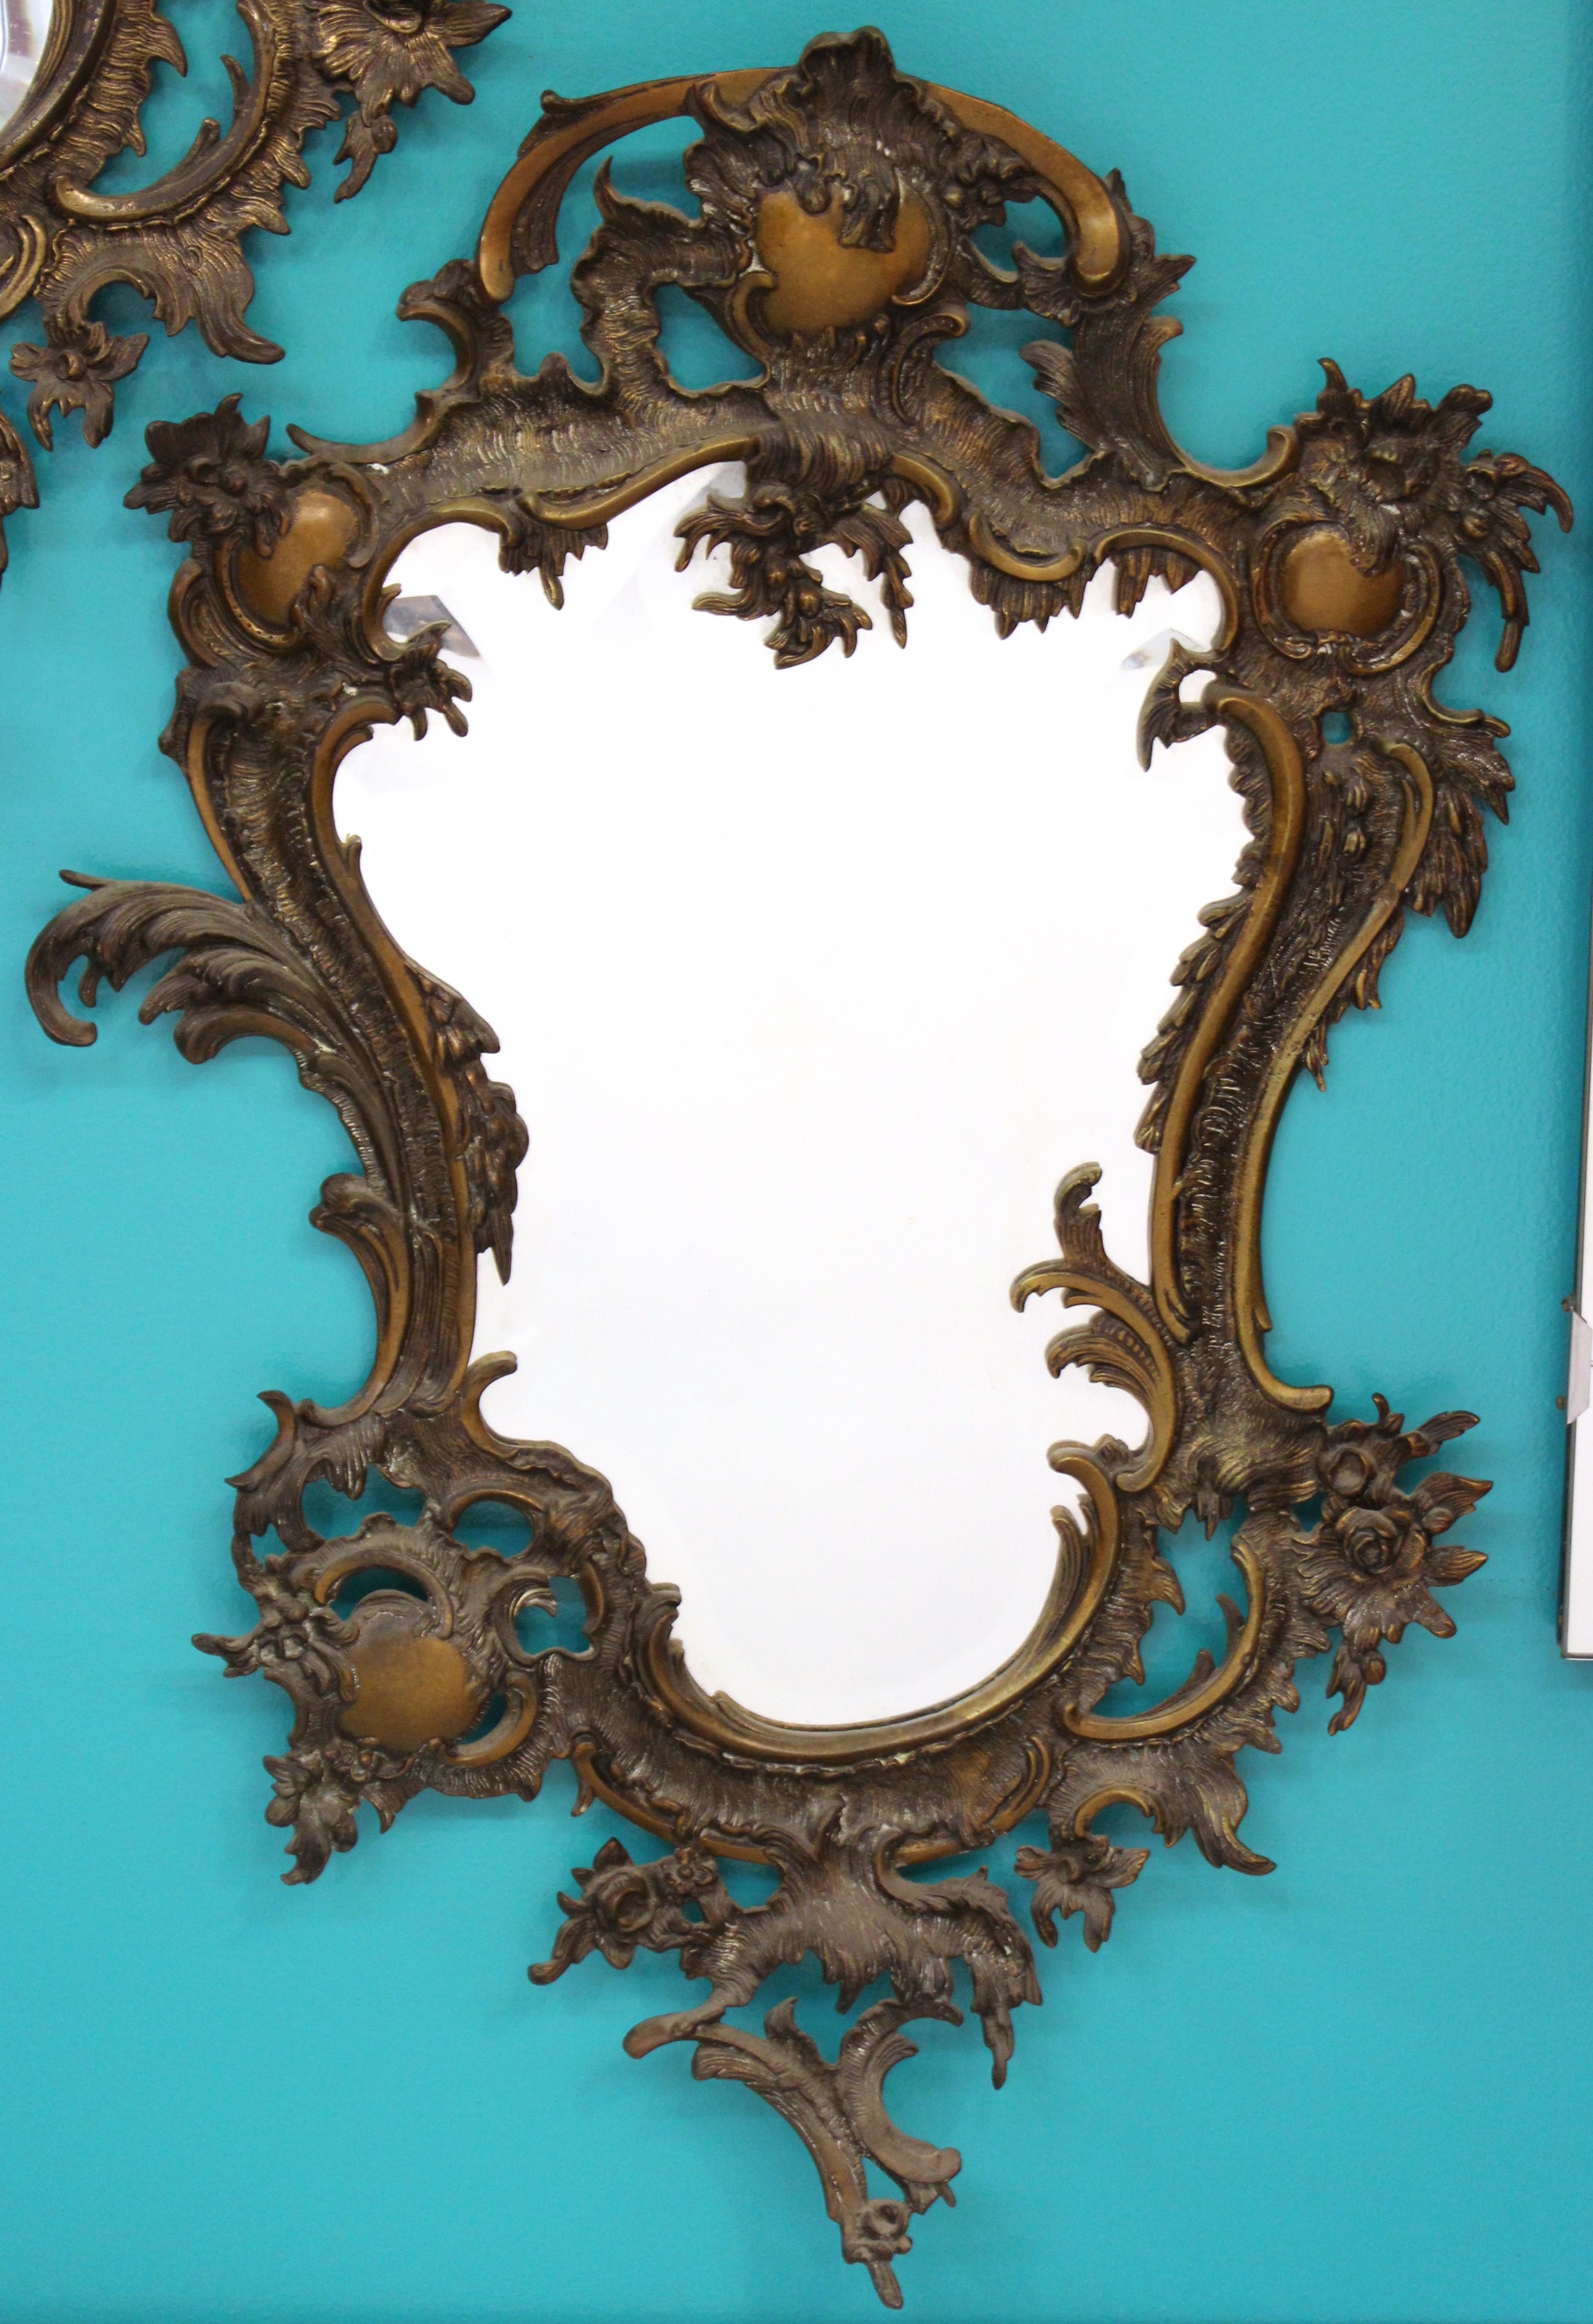 Pair of French Victorian beveled mirrors set in elaborately designed high Baroque style bronze frames. The pair was likely made in France during the 1880s and is in great vintage condition with age-appropriate wear and natural patina.